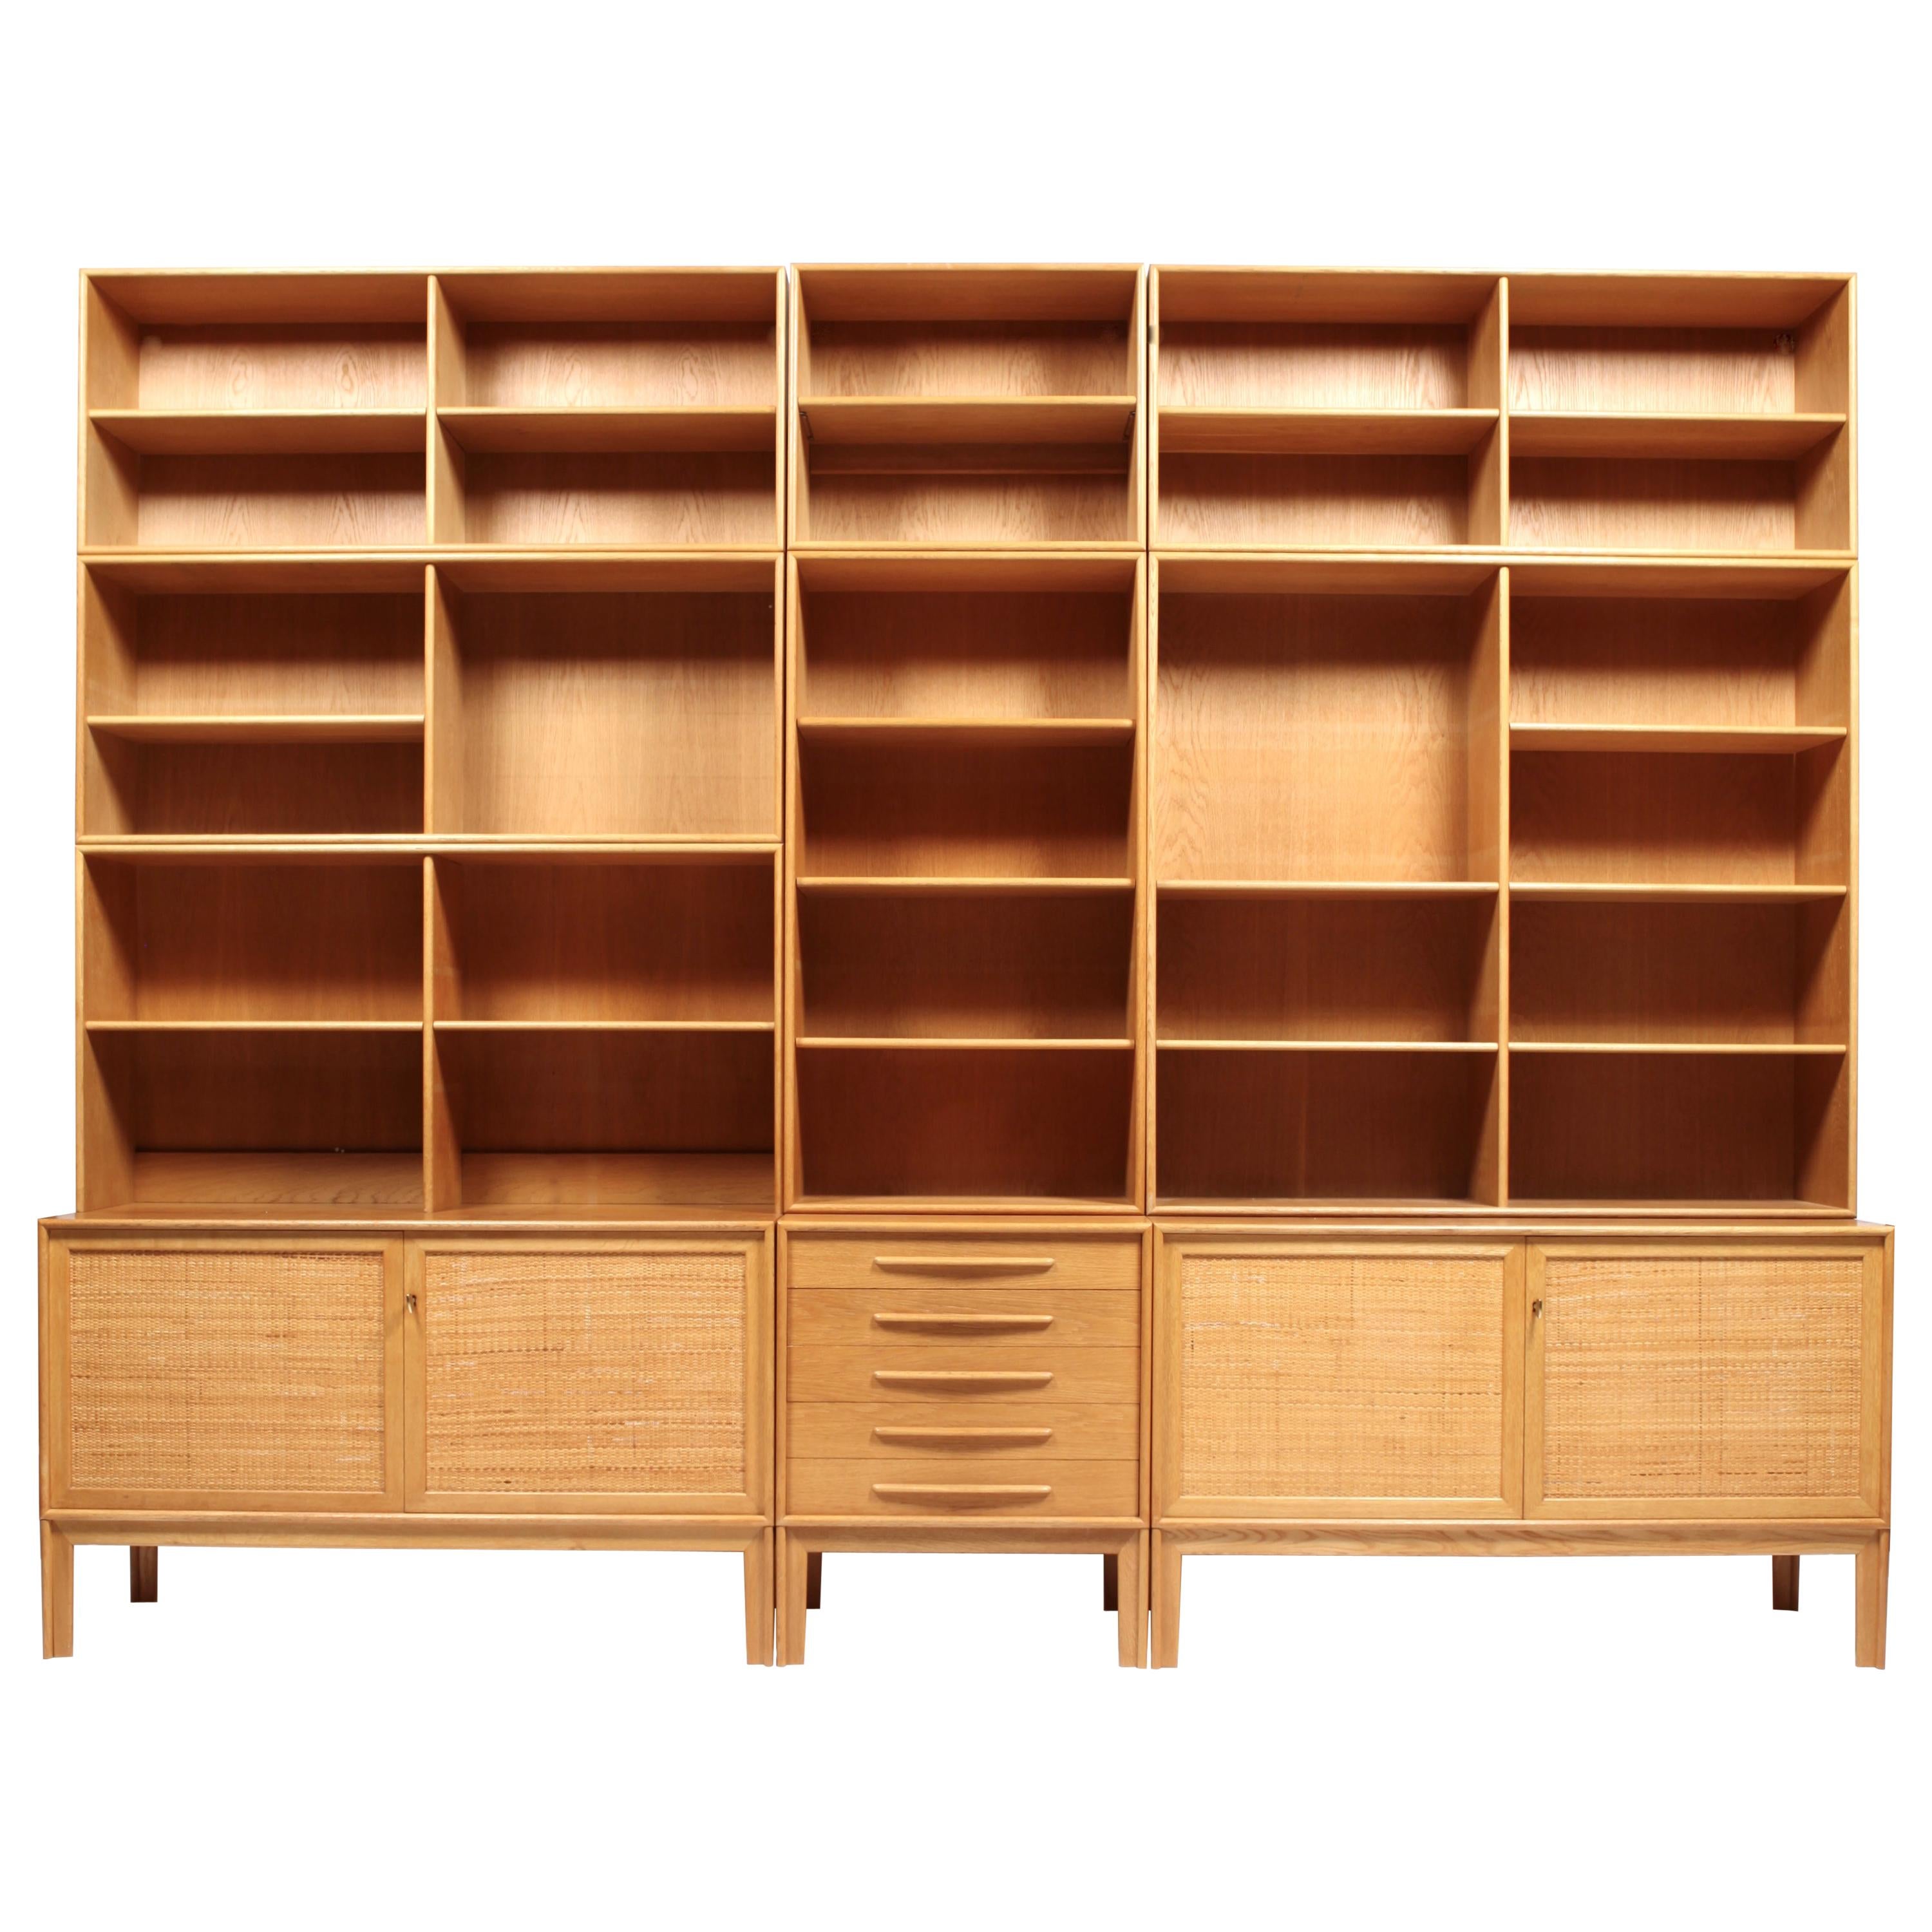 3 Sideboards with Bookcases in Oak and Cane by Alf Svensson, 1963